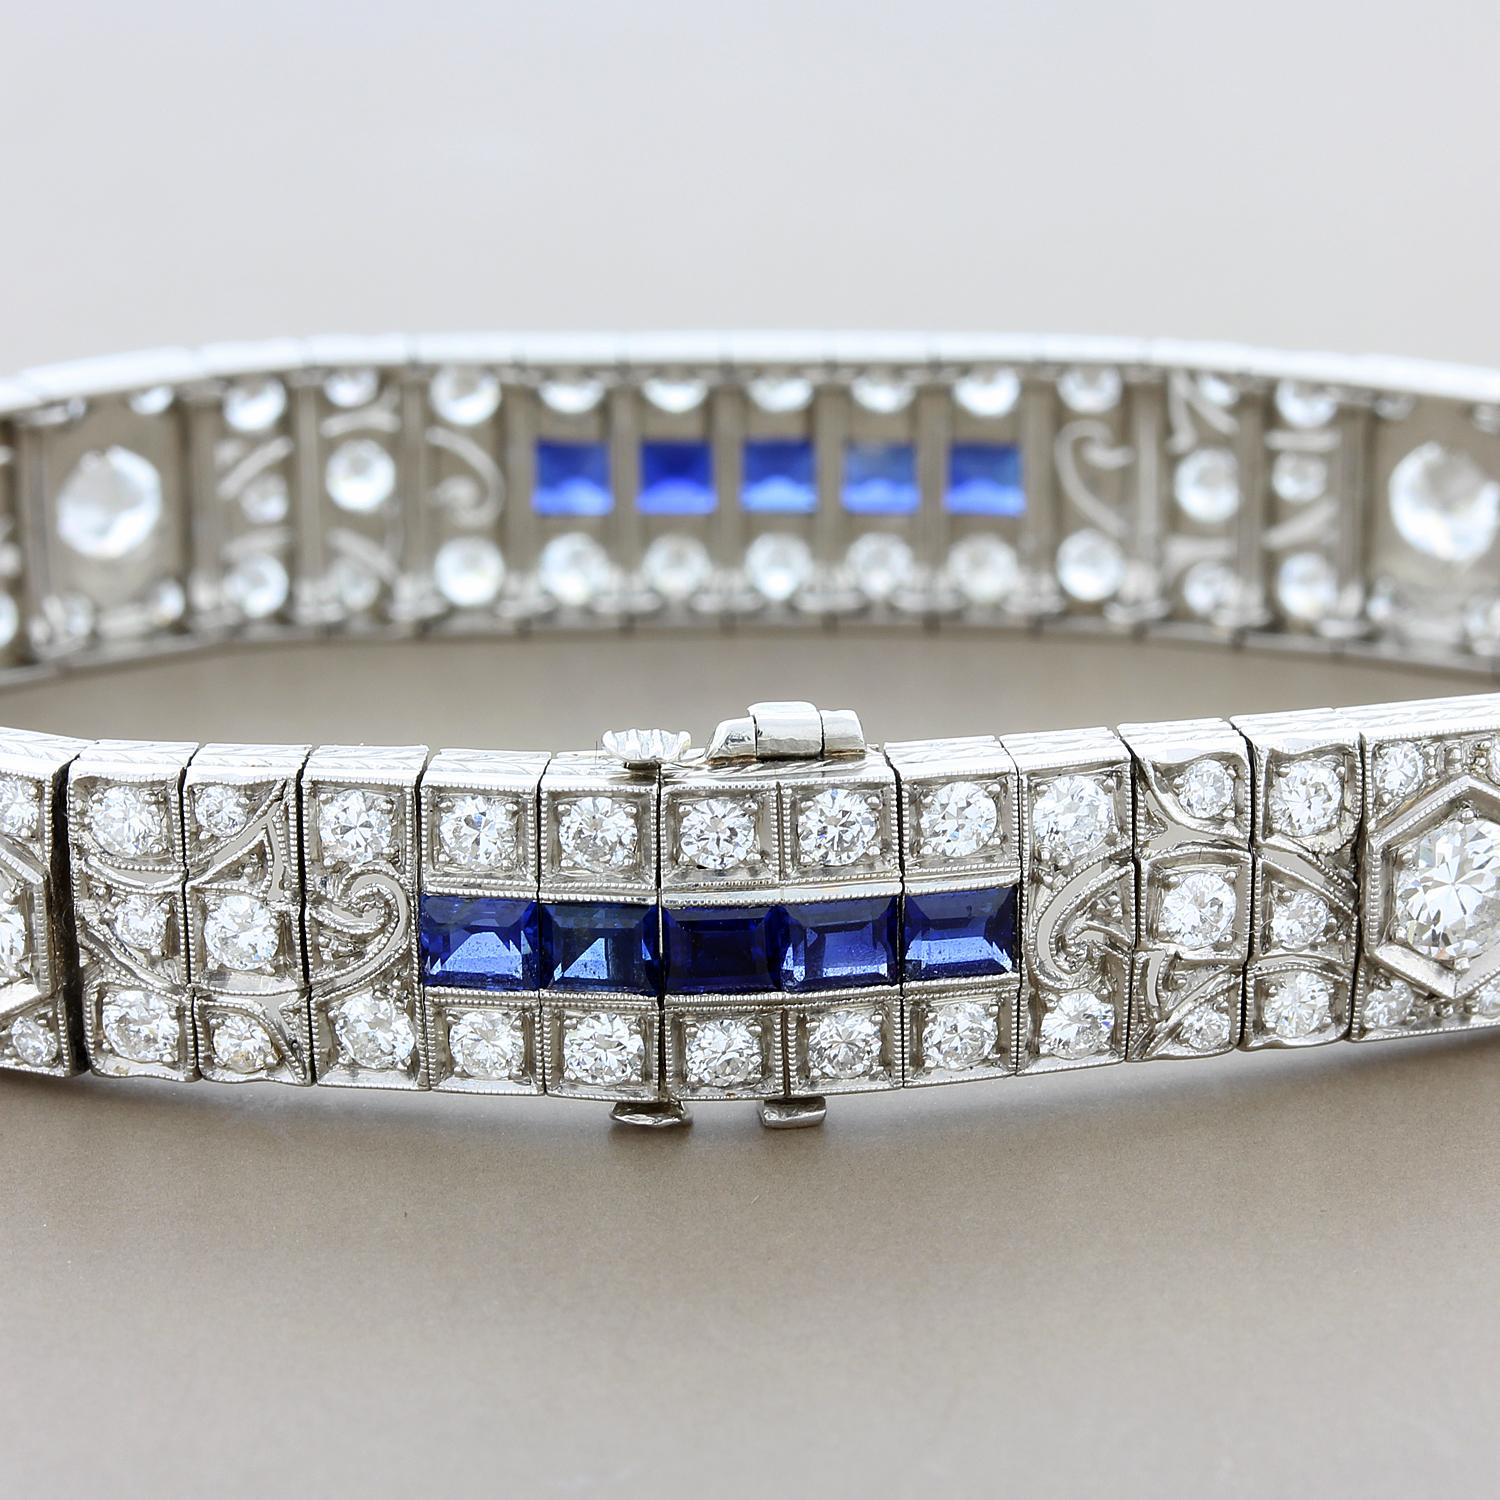 A classic Art Deco piece made in the 1930’s, this platinum bracelet features approximately 8 carats of VS quality round cut diamonds with sapphire accents. With milgrain settings and filigree casting, this is a prime example of Art Deco design and